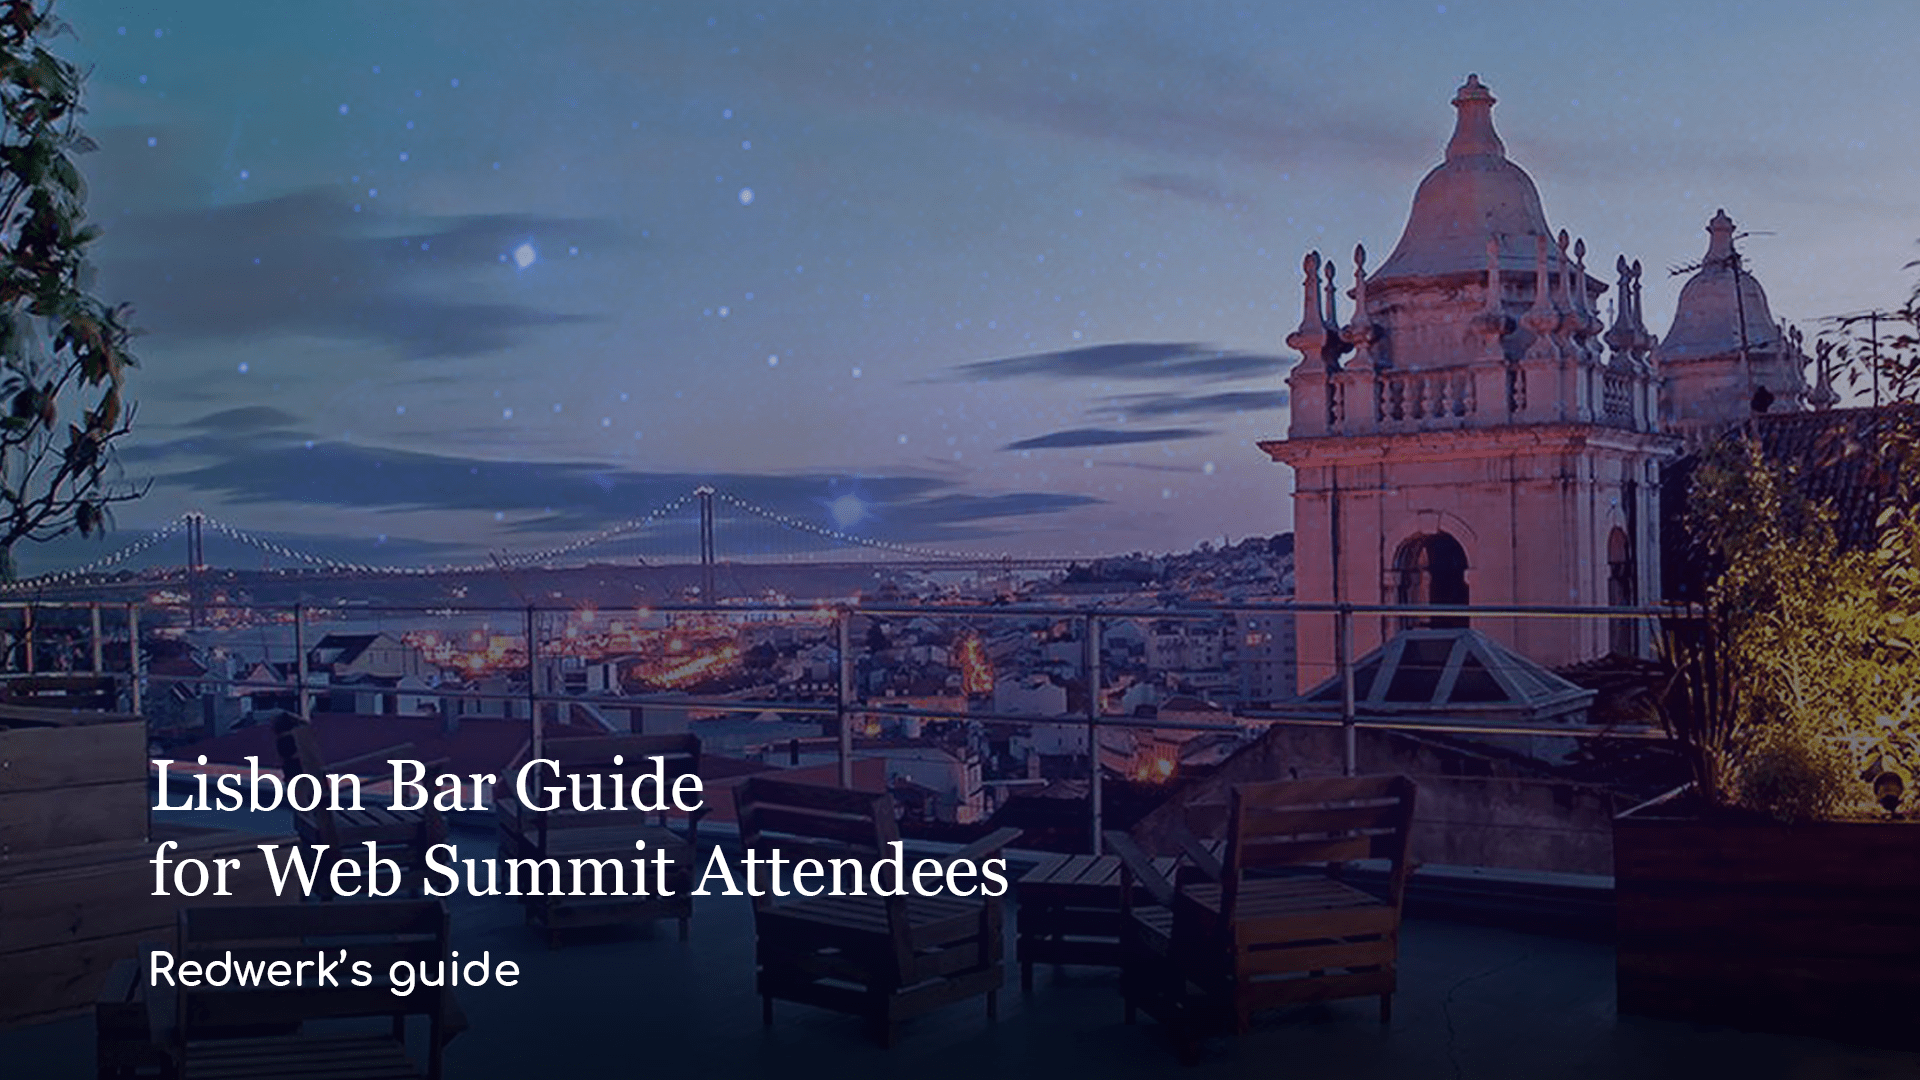 Lisbon Bar Guide for Web Summit Attendees